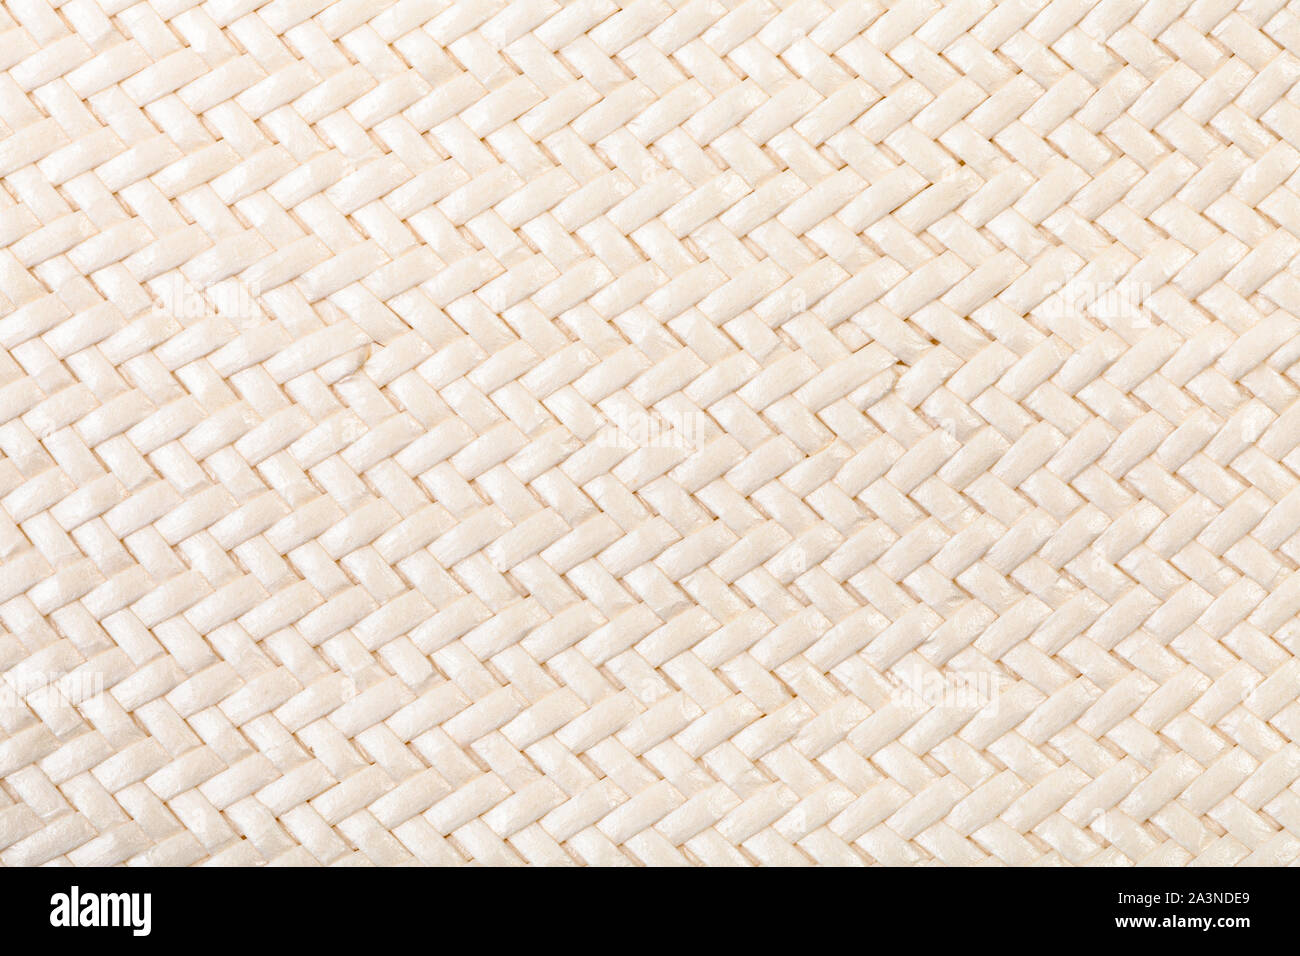 textile background - detail of straw hat from interwoven polished natural toyo fibers Stock Photo